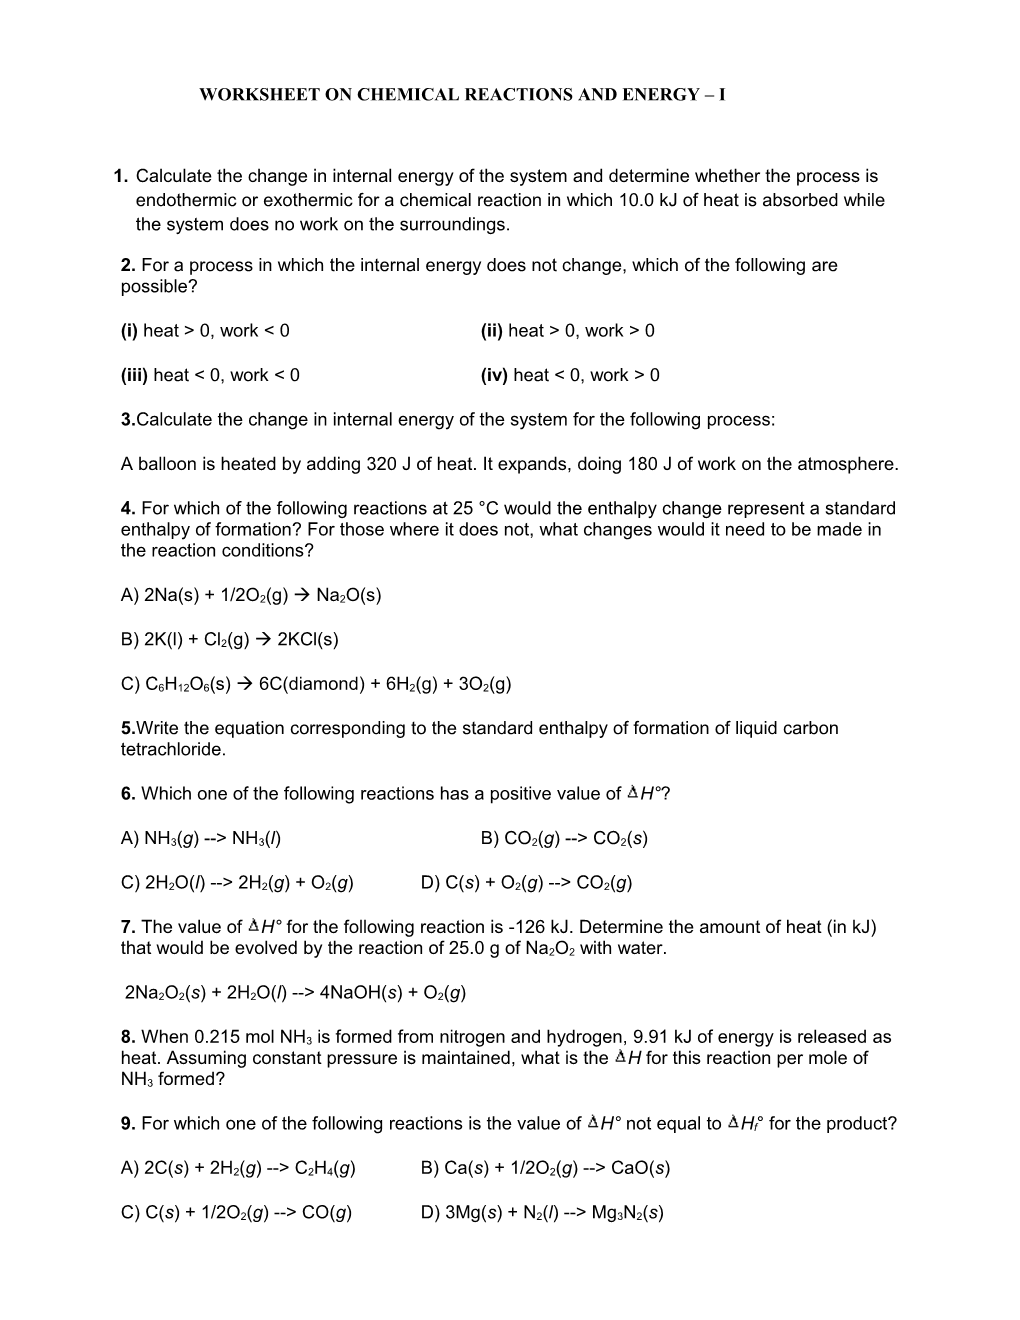 Worksheet on Chemical Reactions and Energy I